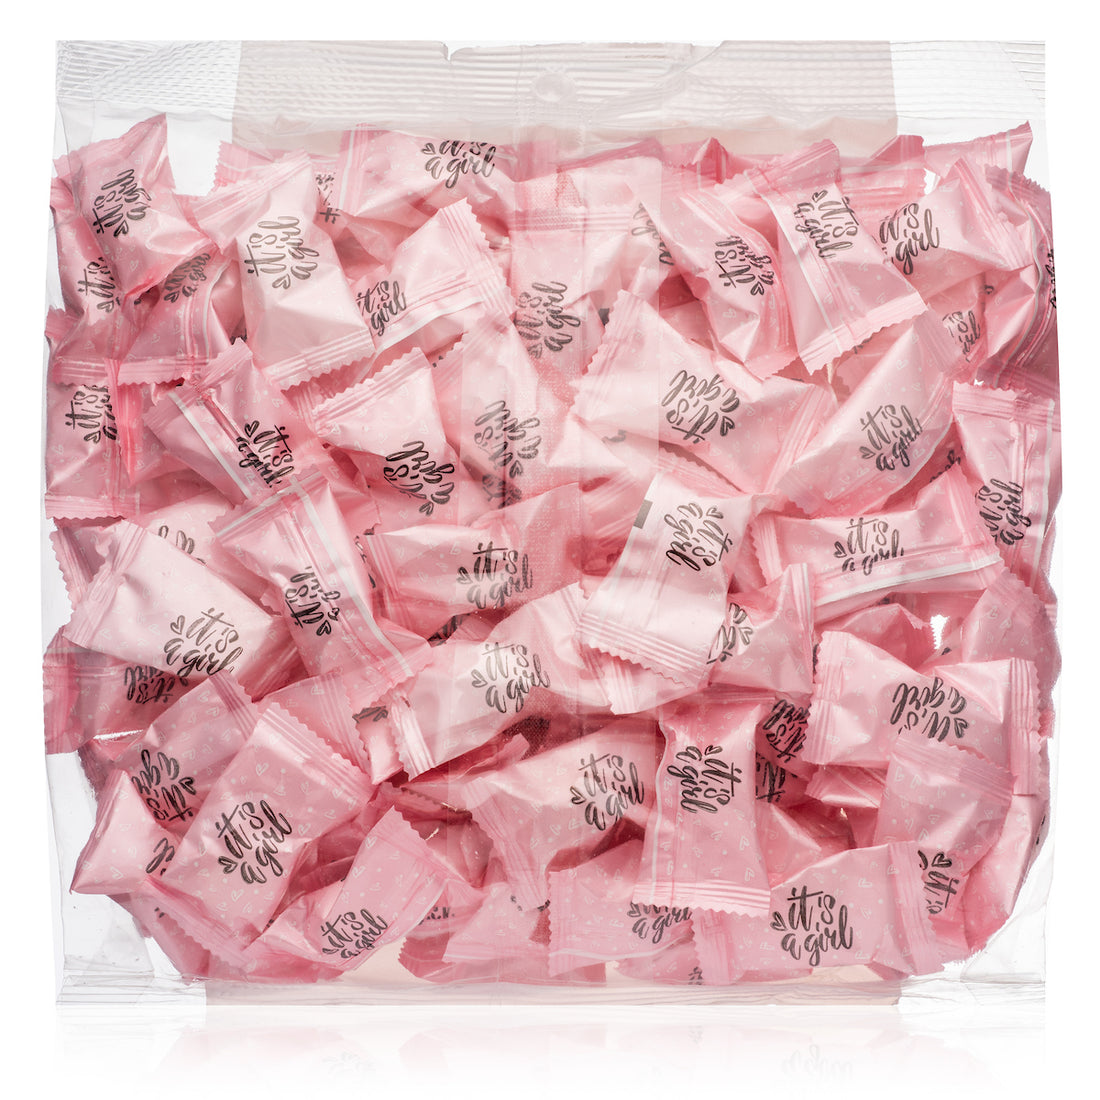 Light Blue Buttermints  Candy Envy - Individually Wrapped Mints